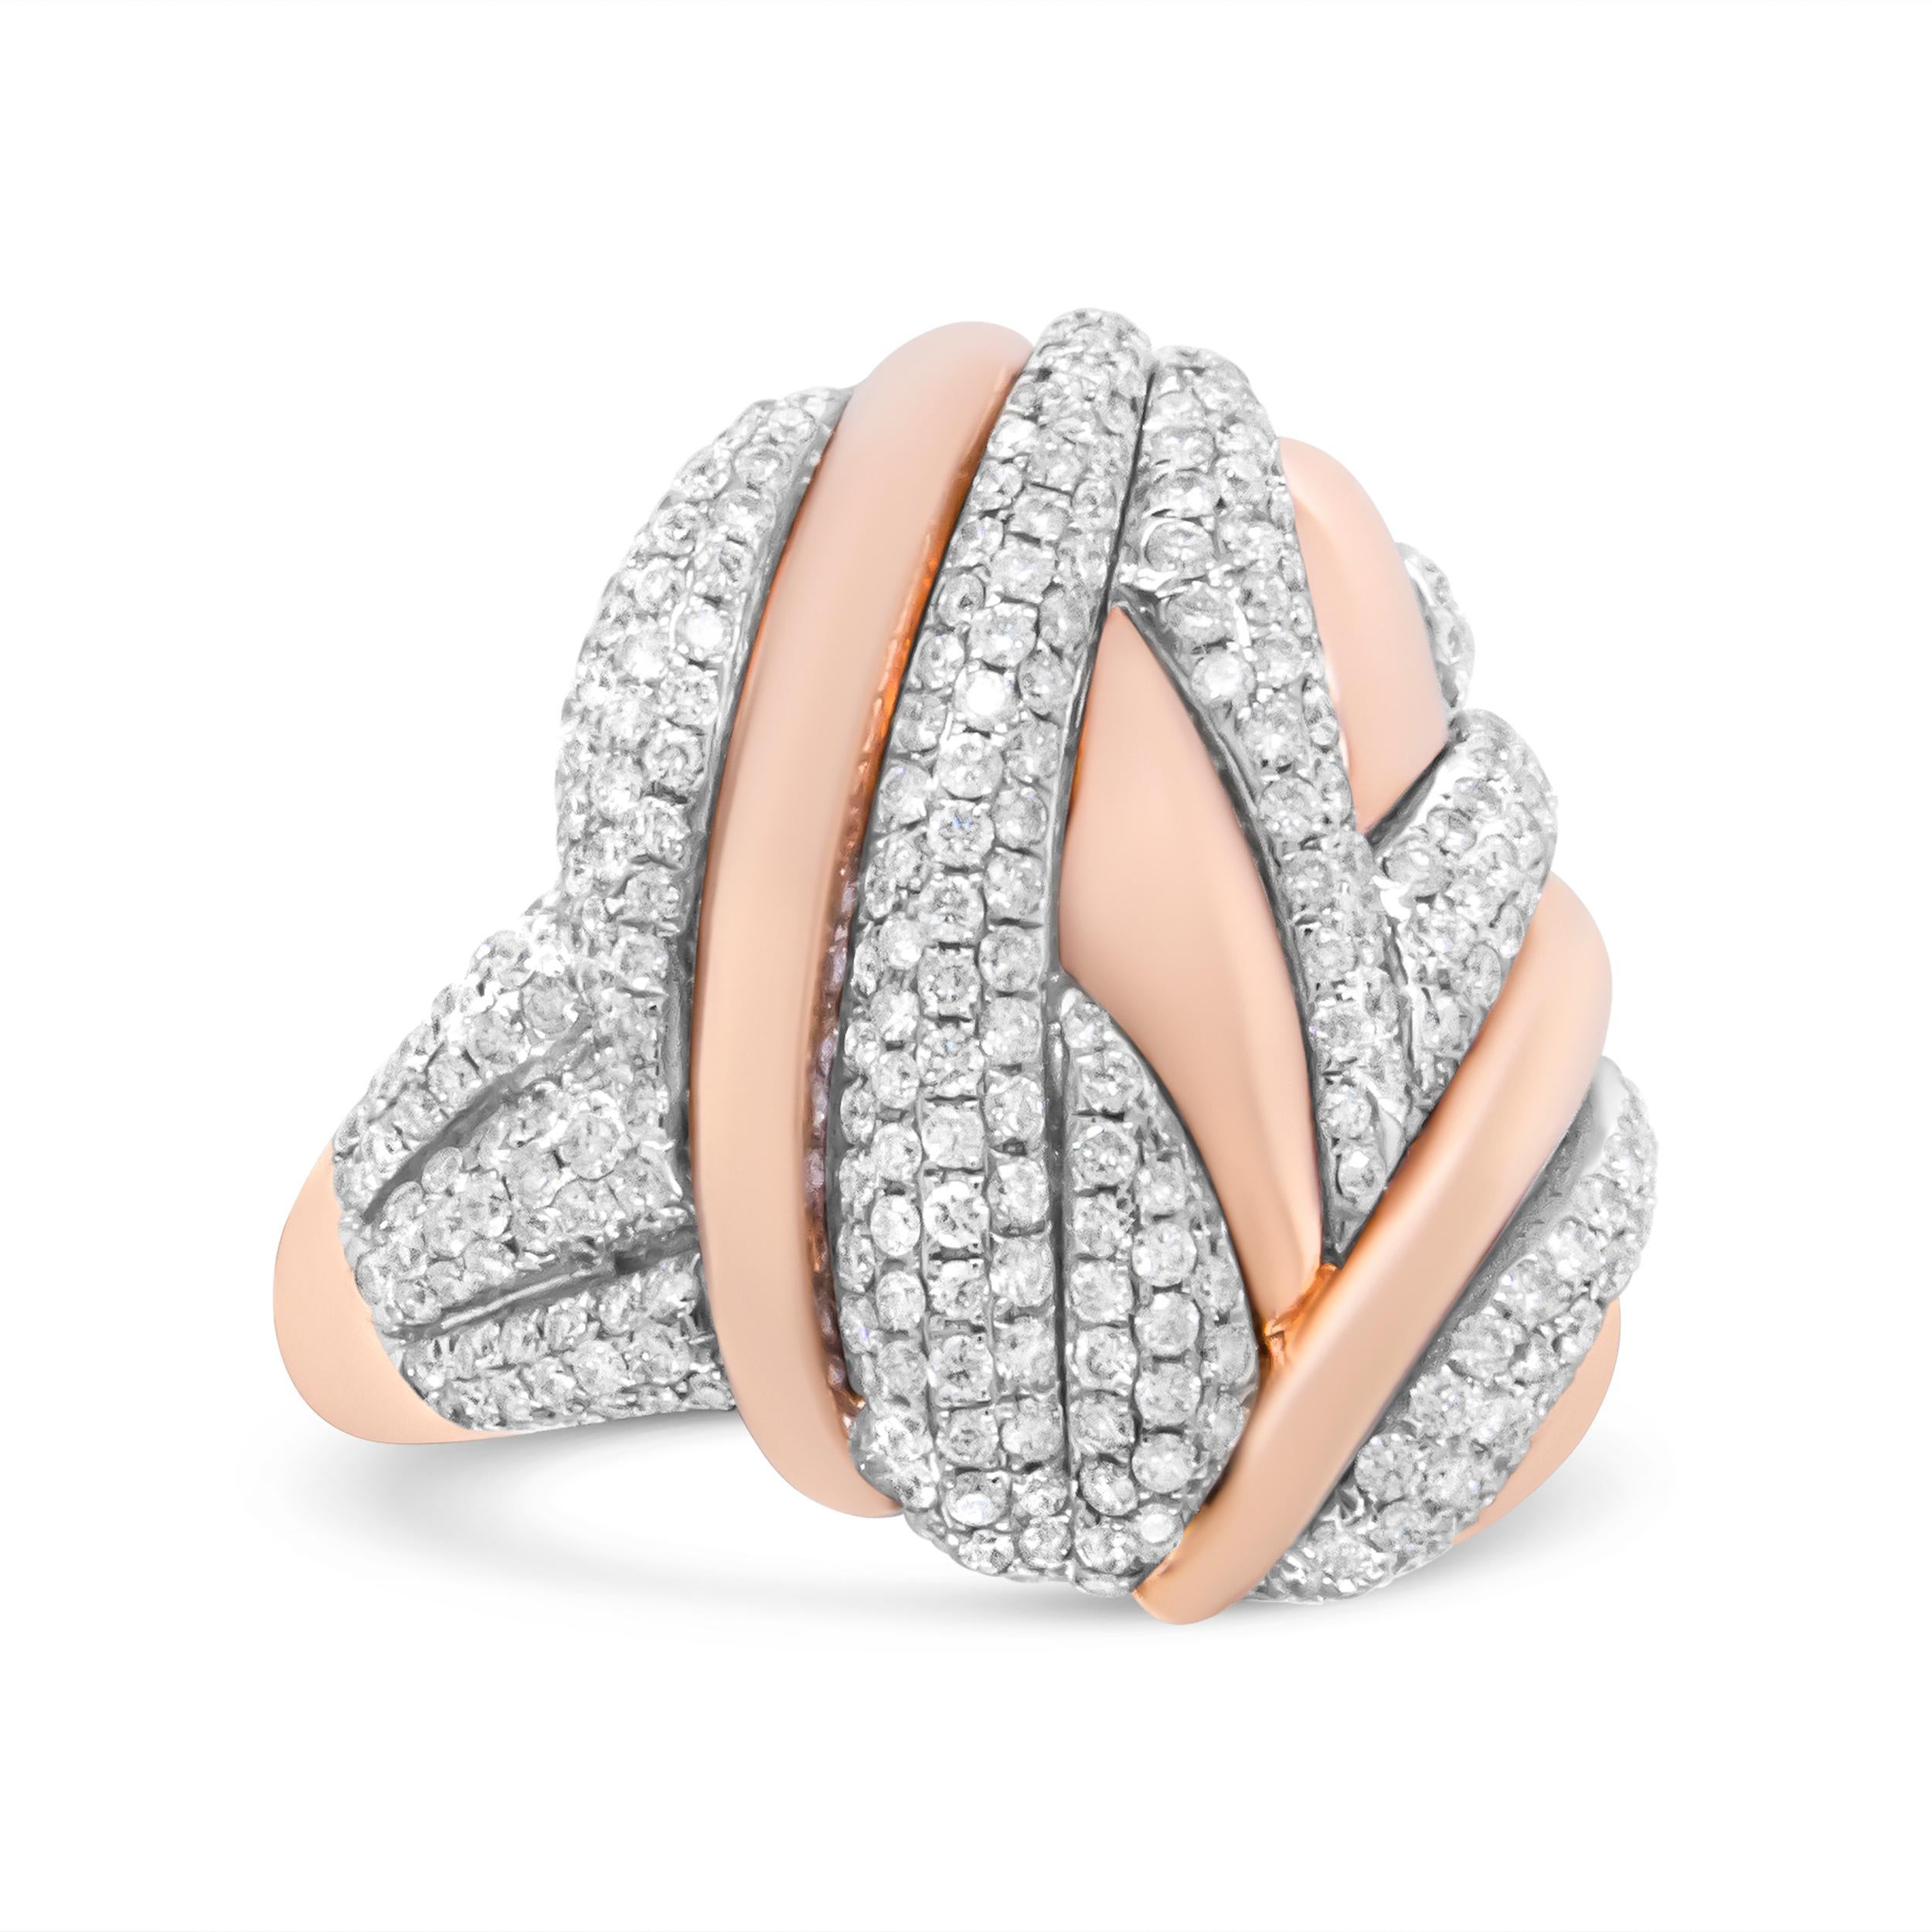 An oval ring with an all-encompassing bypass design, this modern and luxurious ring is the addition to your jewelry collection you've been hunting for. The ring is crafted in deep 18k rose gold, and is interloped with streaks of natural white gold